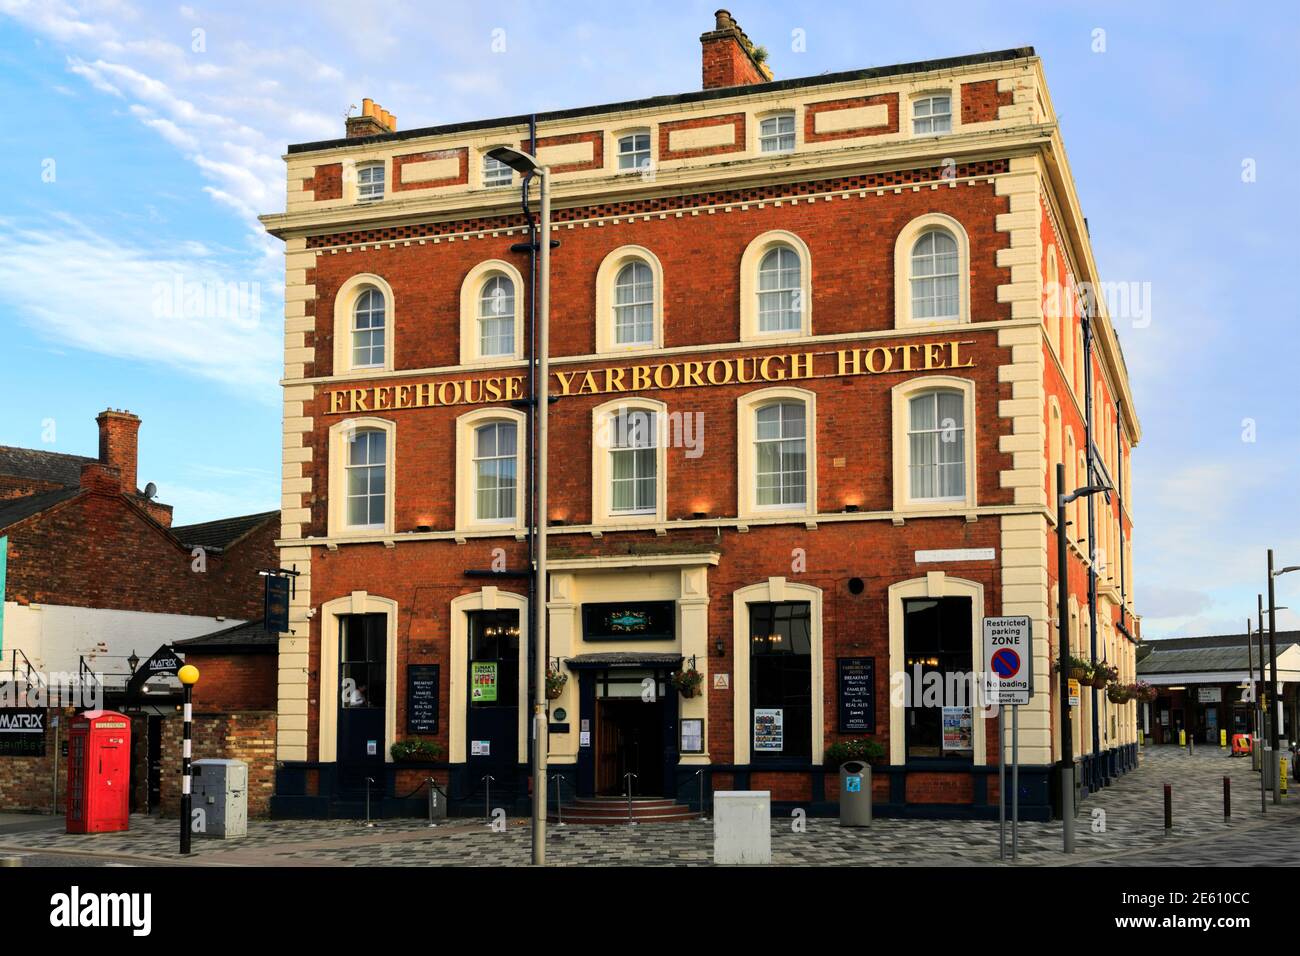 The Yarborough Hotel, a Weatherspoons pub and hotel, Grimsby town, Lincolnshire, England Stock Photo